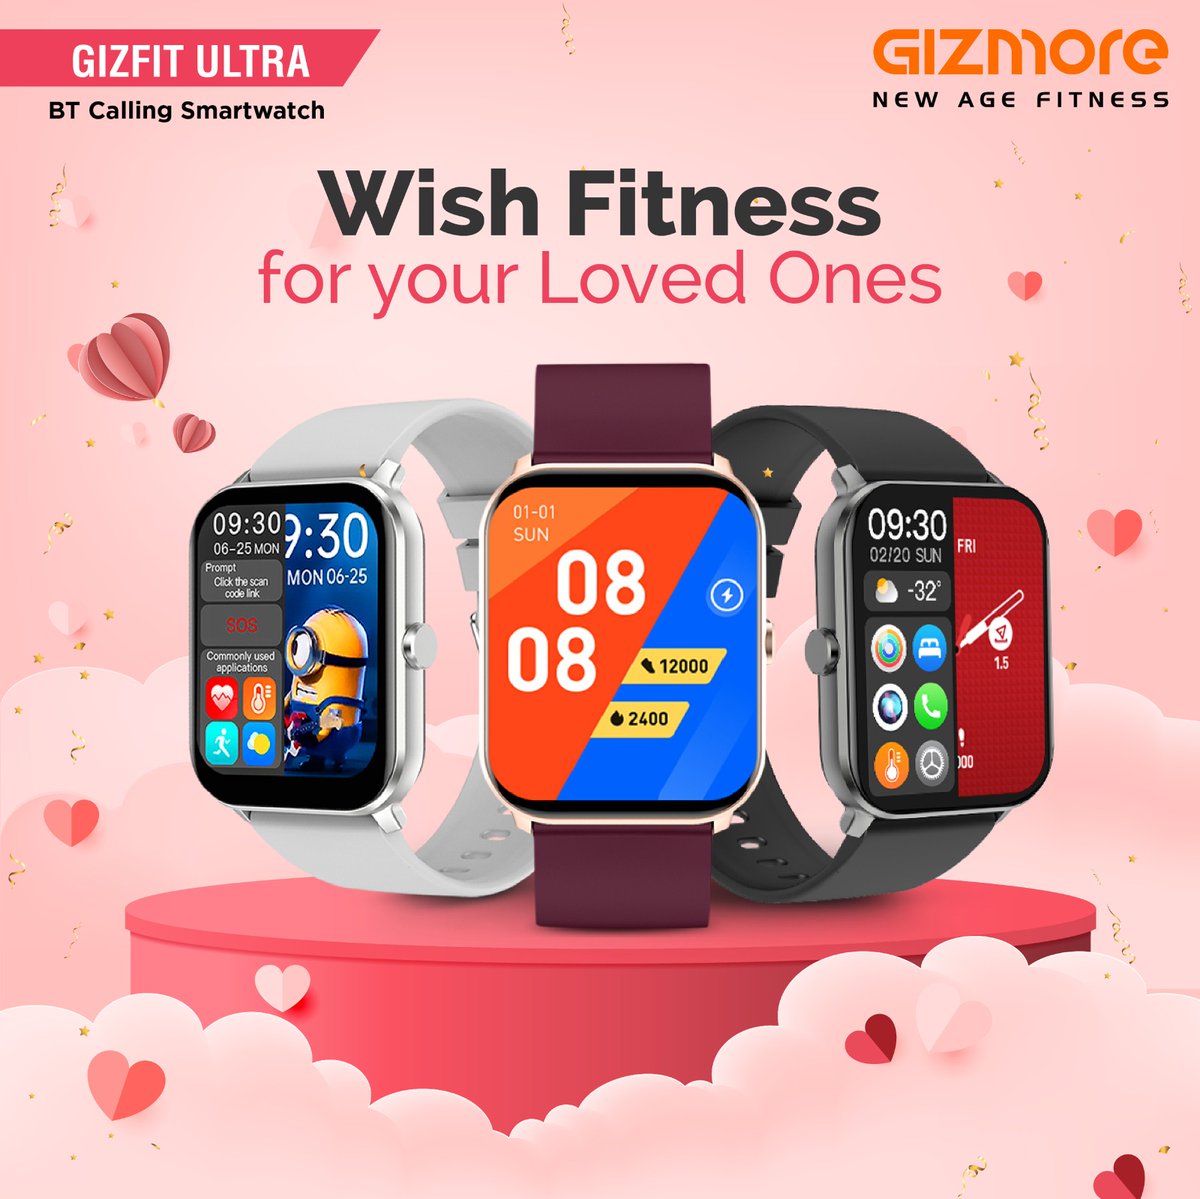 This valentines day, gift #Gizmore #Smartwatch as the best #ValentineGifts to your loved ones. 
Buy now : bit.ly/3XzJpUI
#NewAgeFitness #ValentinesDay @Flipkart